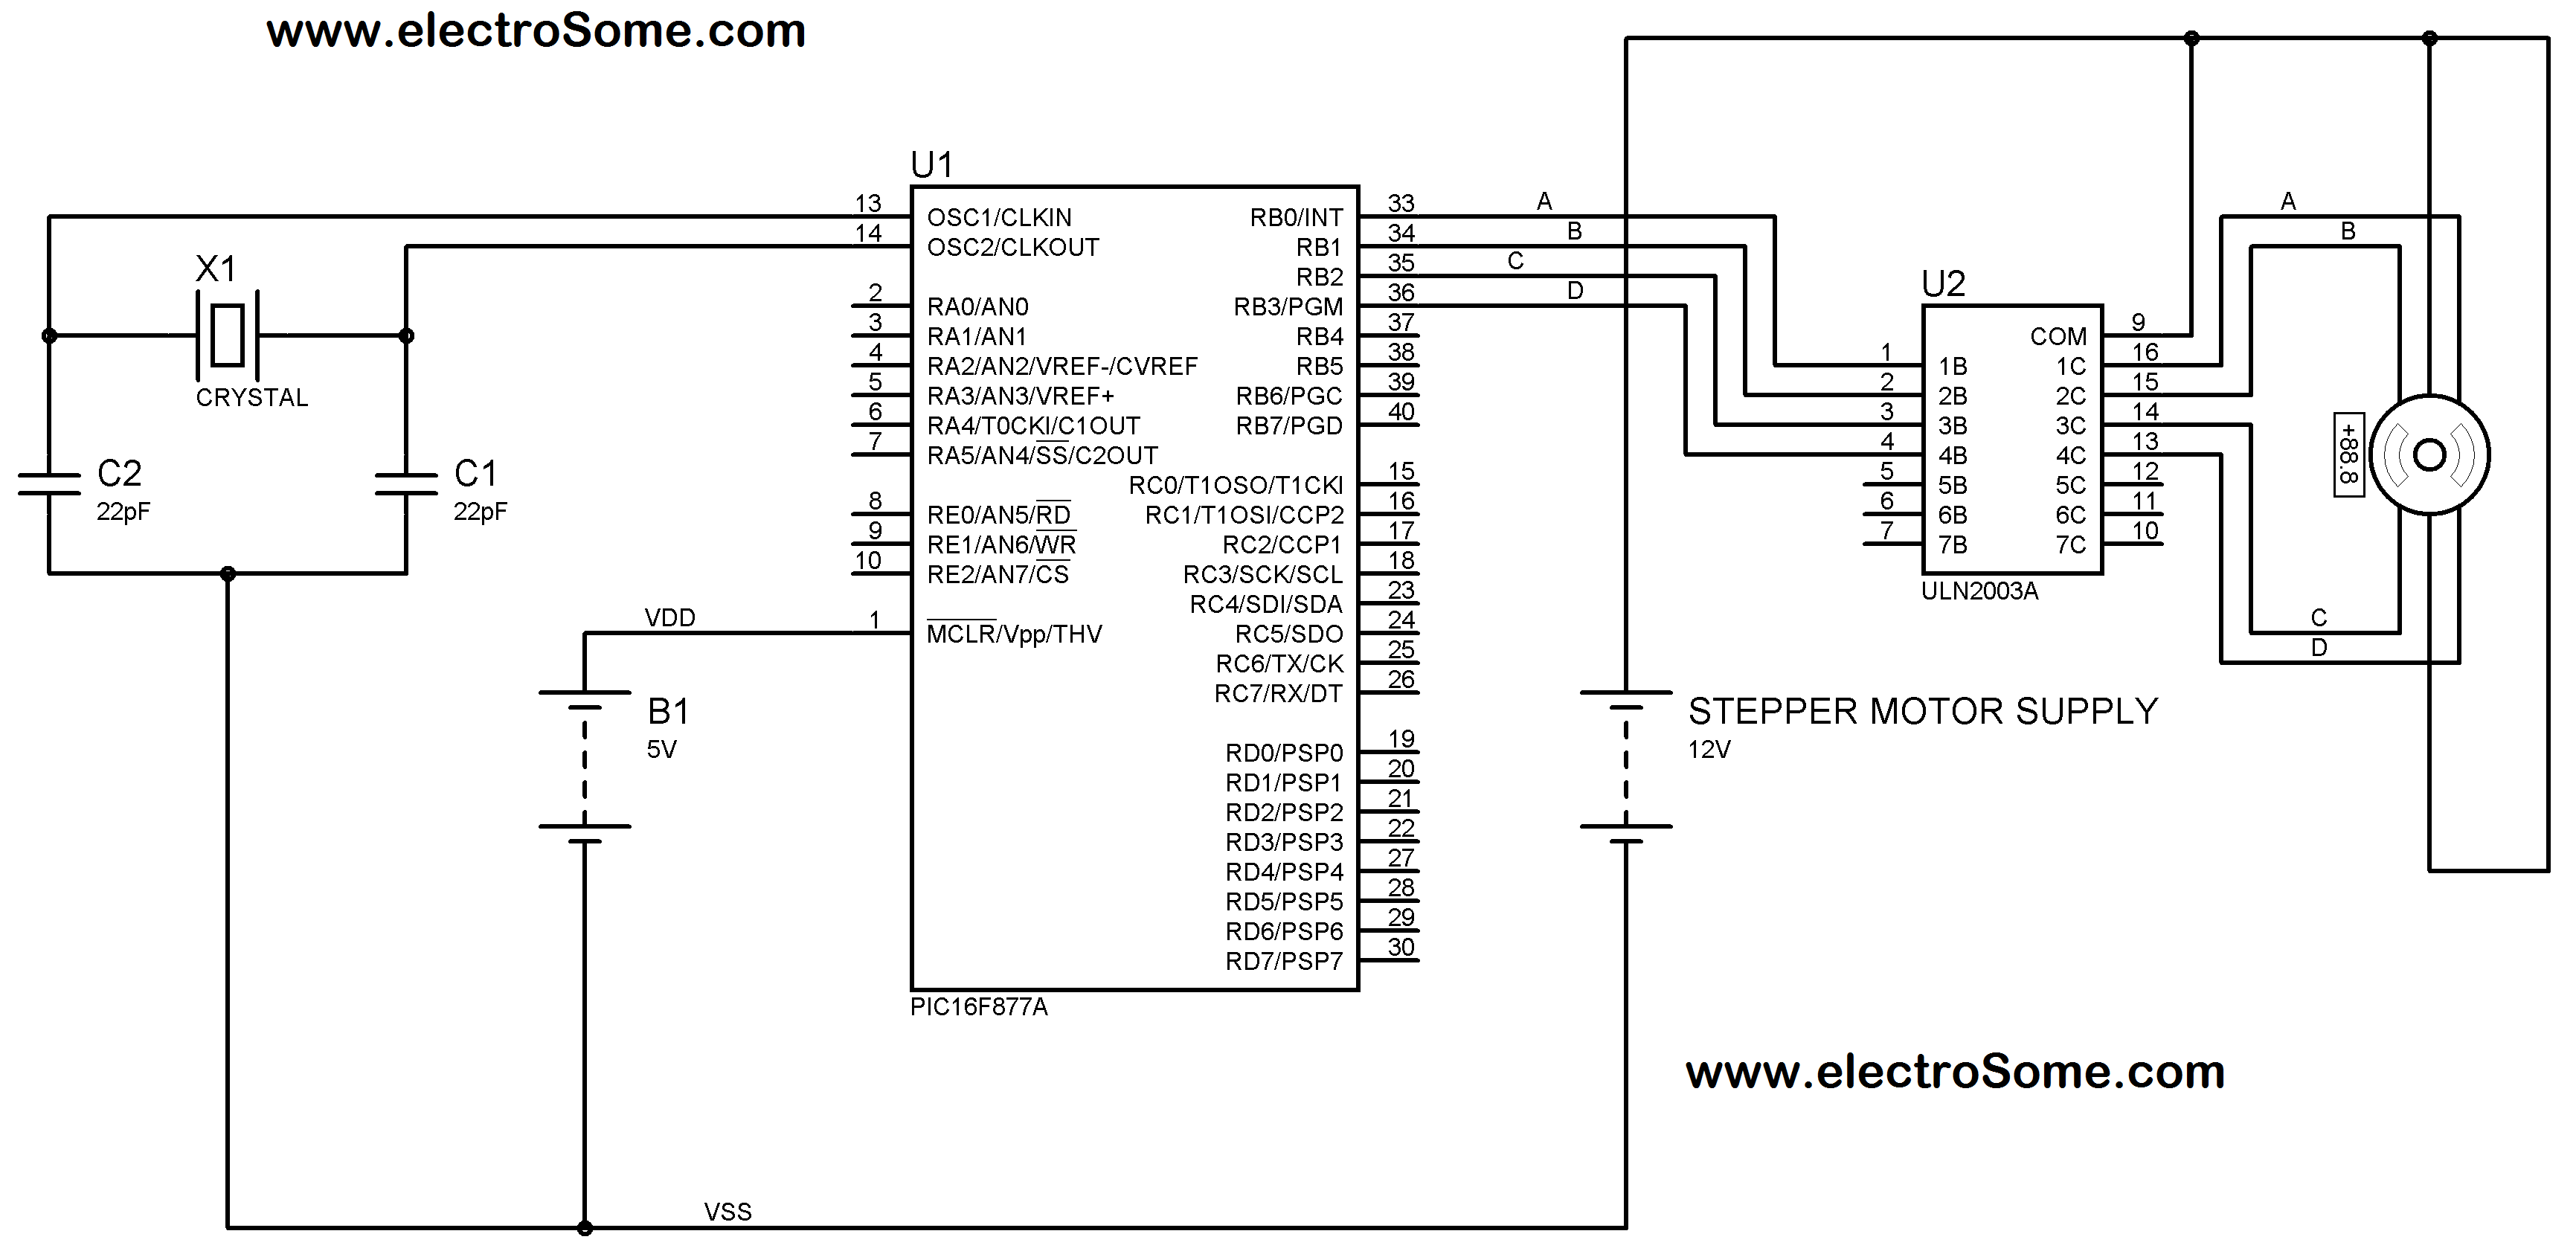 Interfacing Unipolar Stepper Motor with PIC Microcontroller using ULN2003